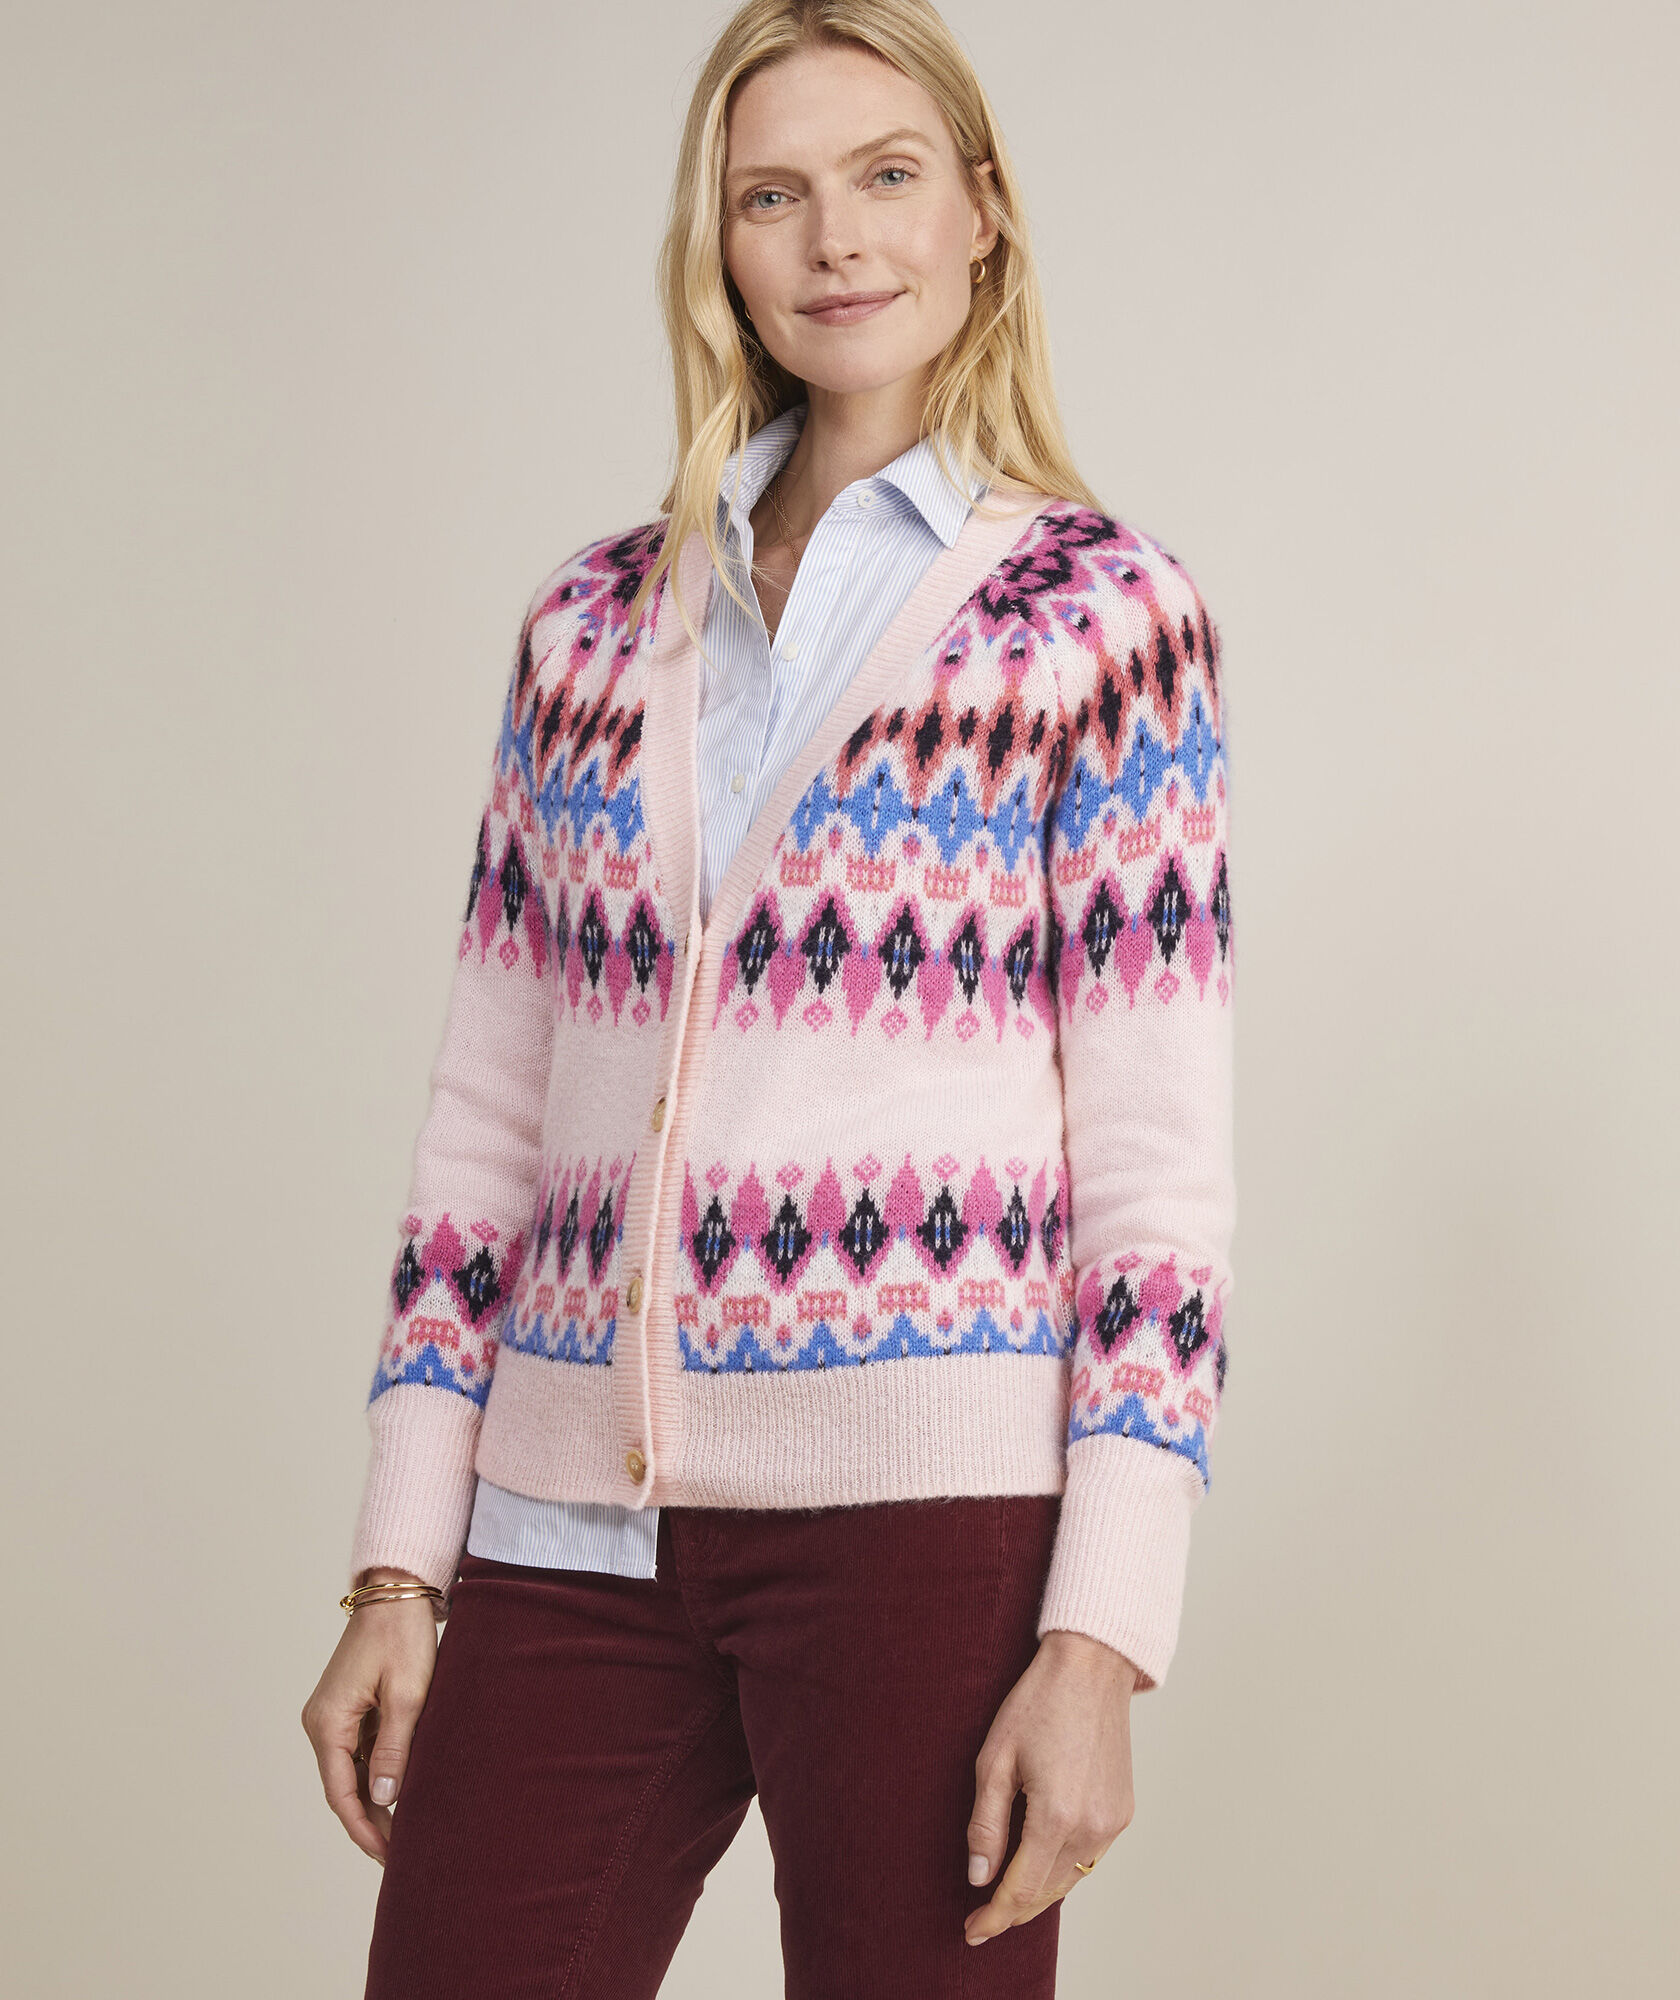 Shop Casual & Classic Women's Clothing at vineyard vines